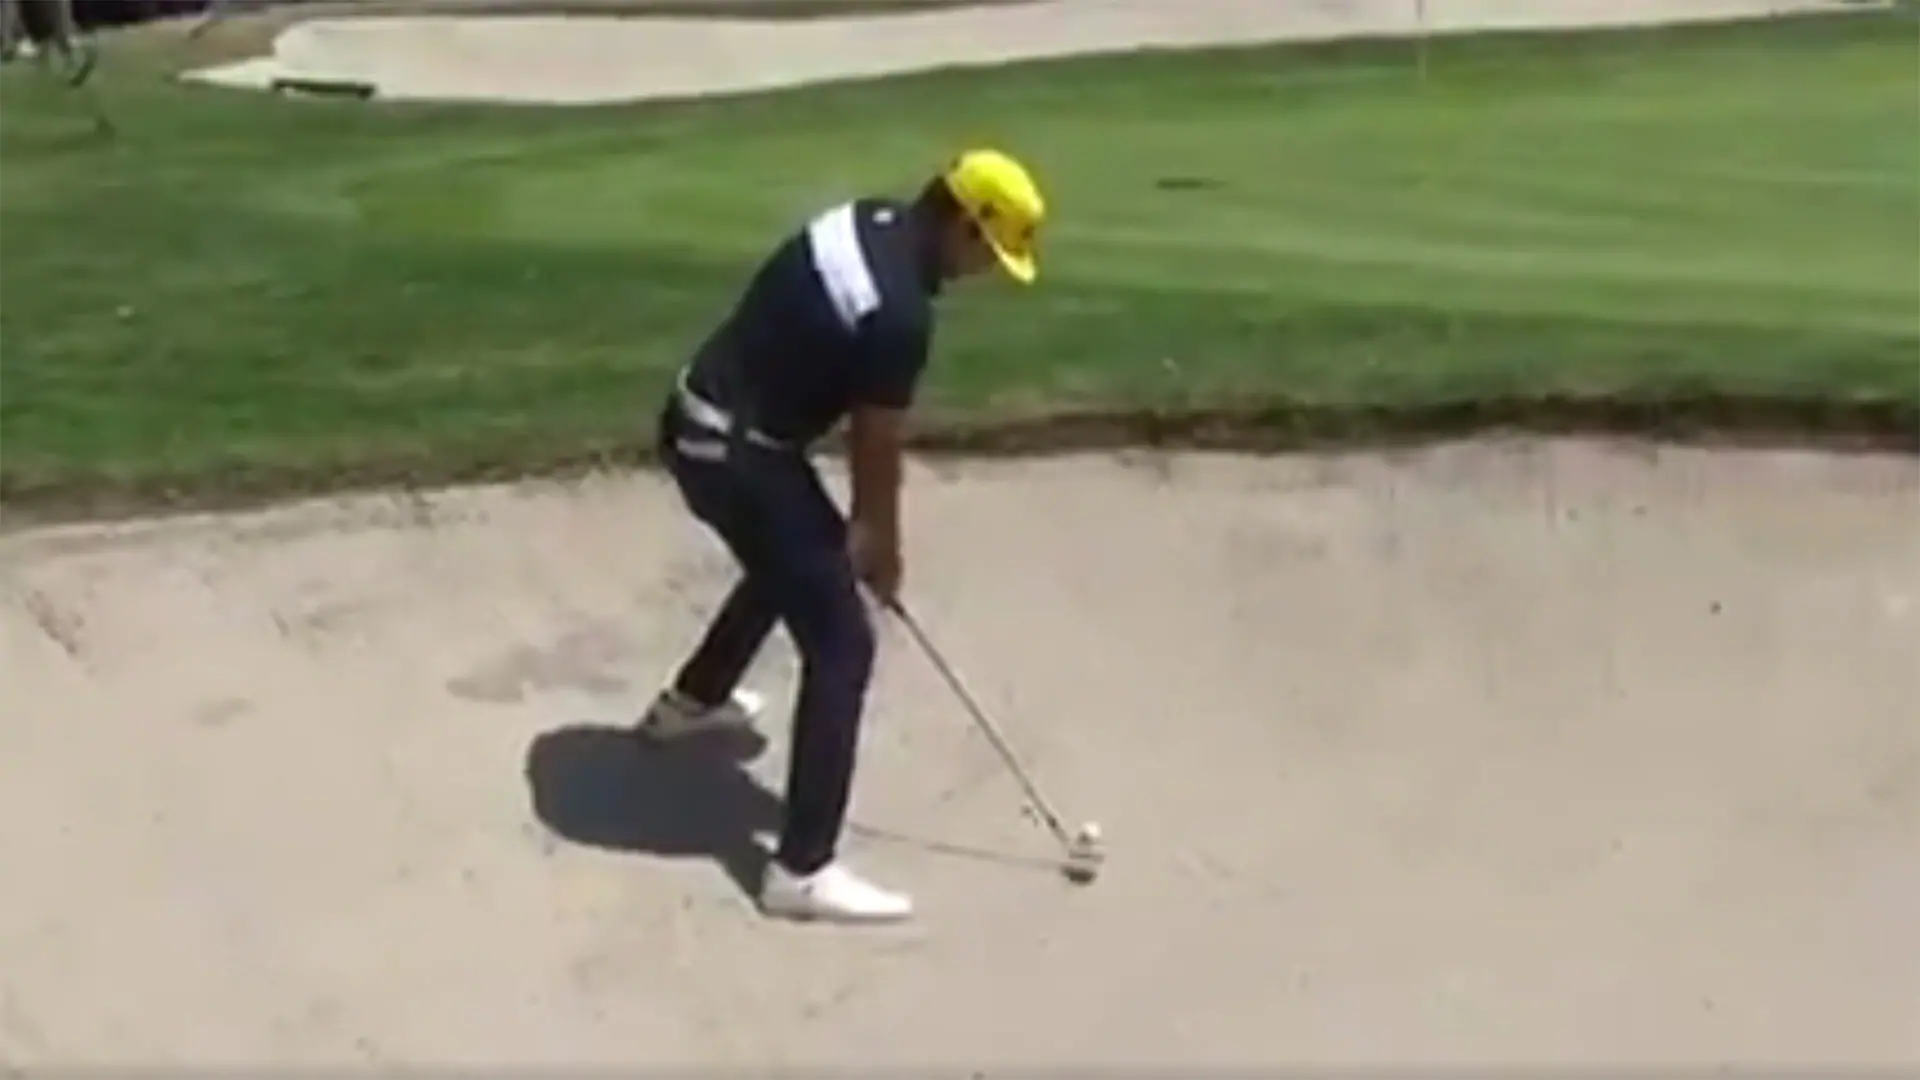 Watch: Rafa ties lead after eagle holeout from sand